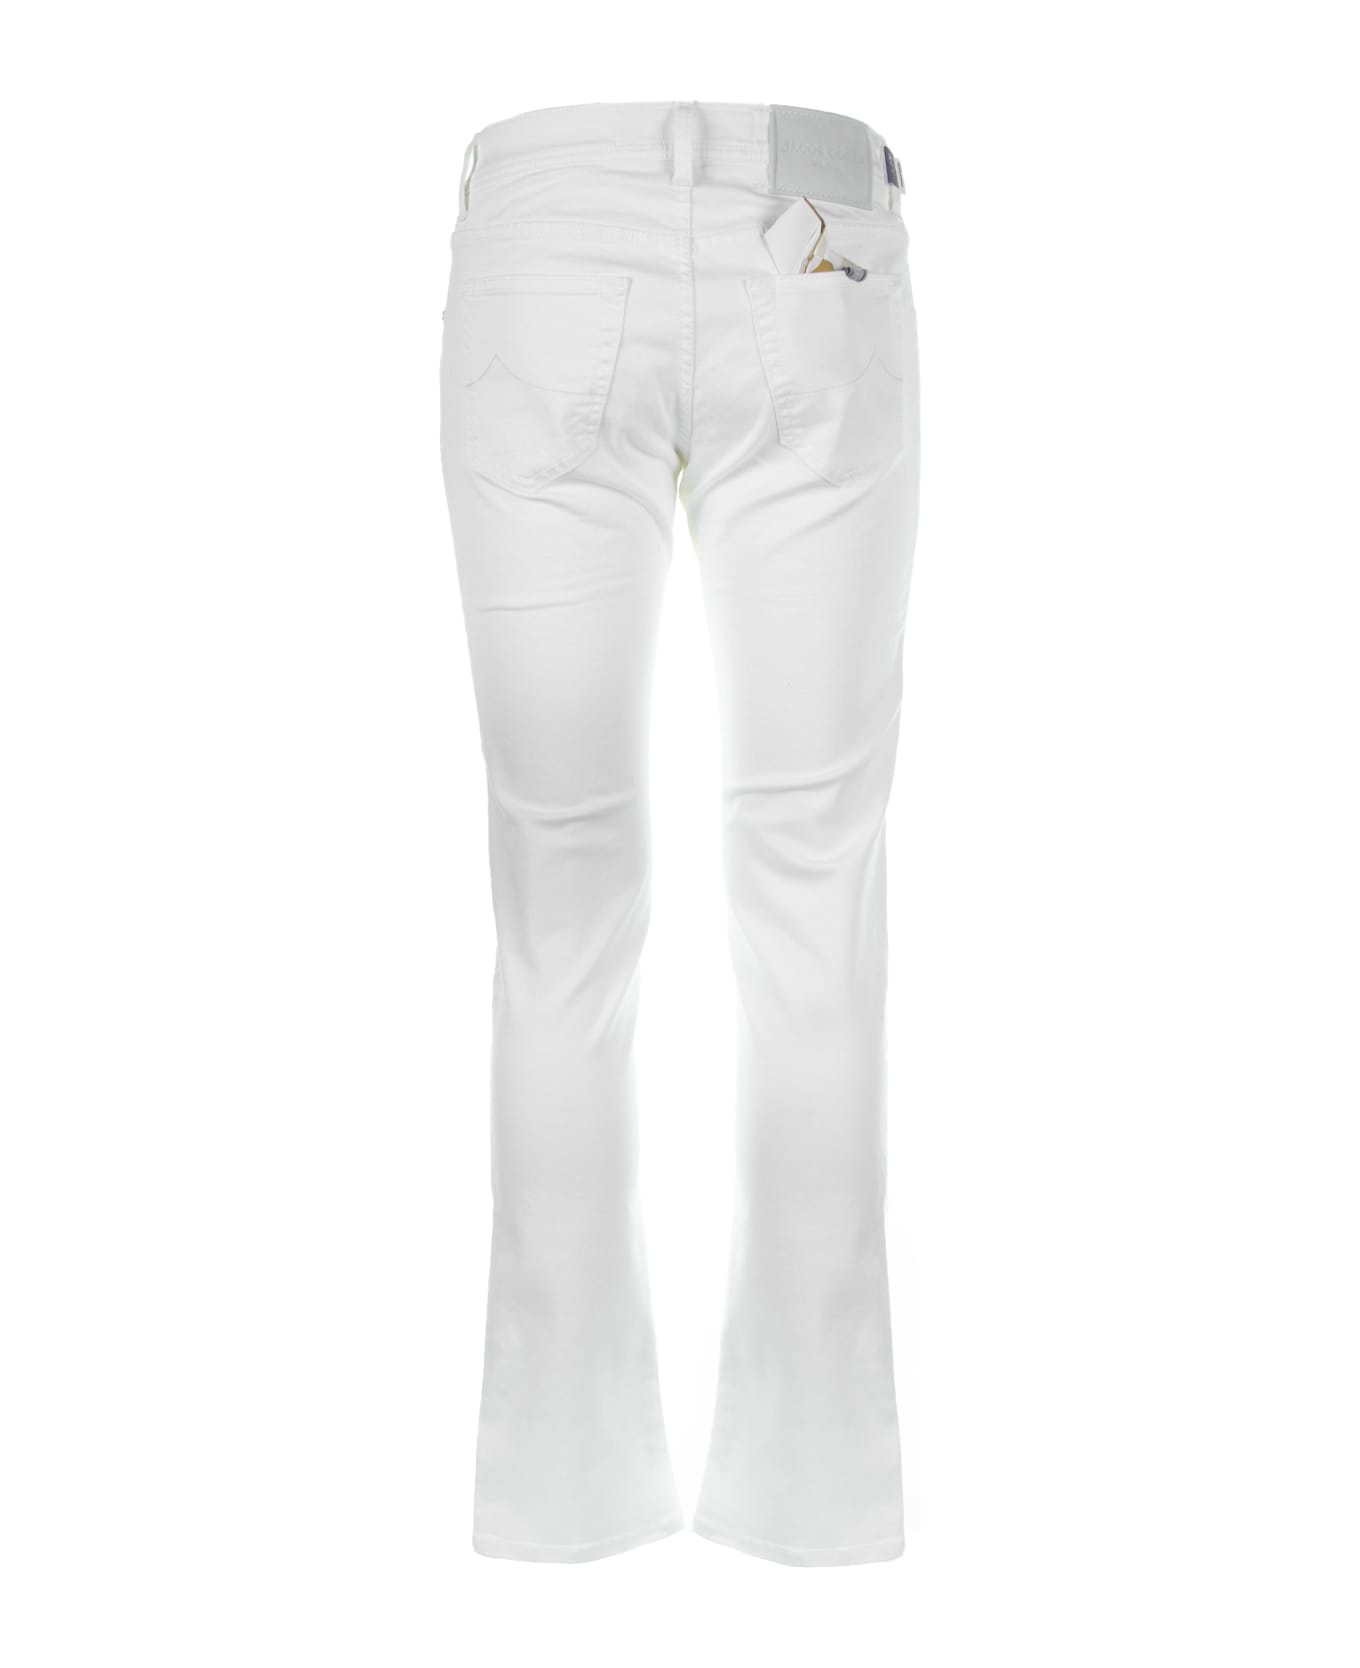 Jacob Cohen White 5-pocket Trousers In Cotton - BIANCO ボトムス